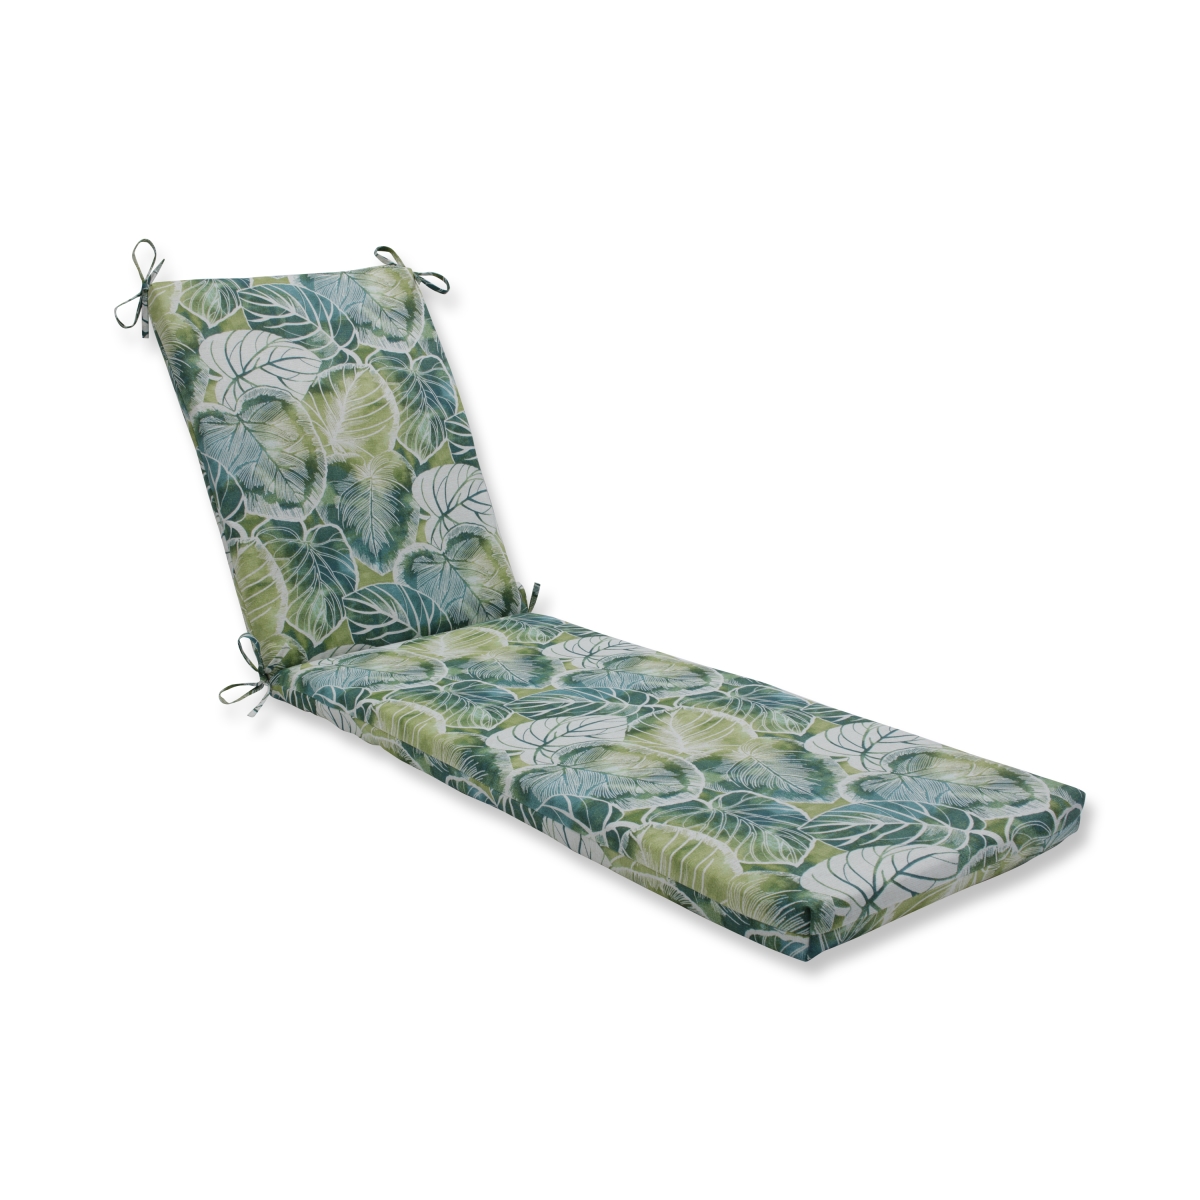 80 X 23 X 3 In. Outdoor & Indoor Key Cove Lagoon Chaise Lounge Cushion, Green